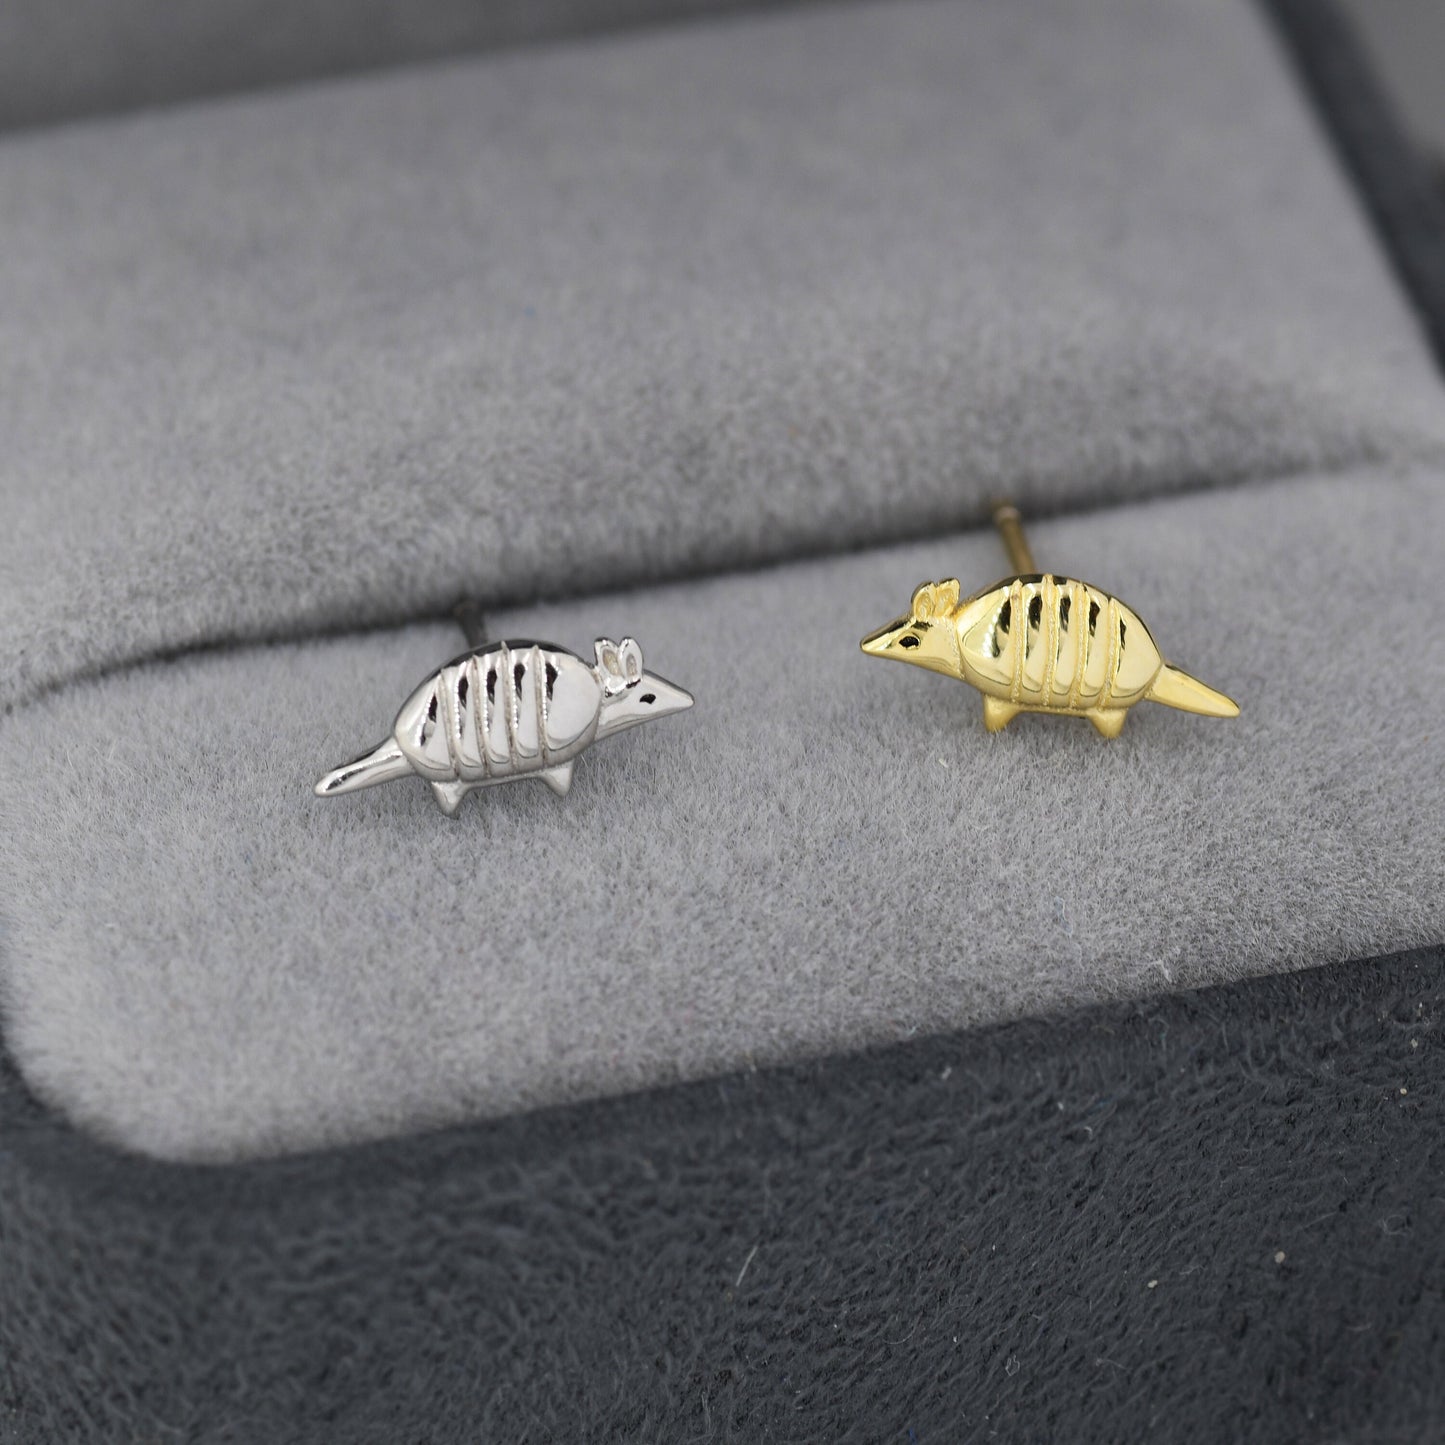 Armadillo Stud Earrings in Sterling Silver, Silver or Gold, Nature Inspired Animal Earrings